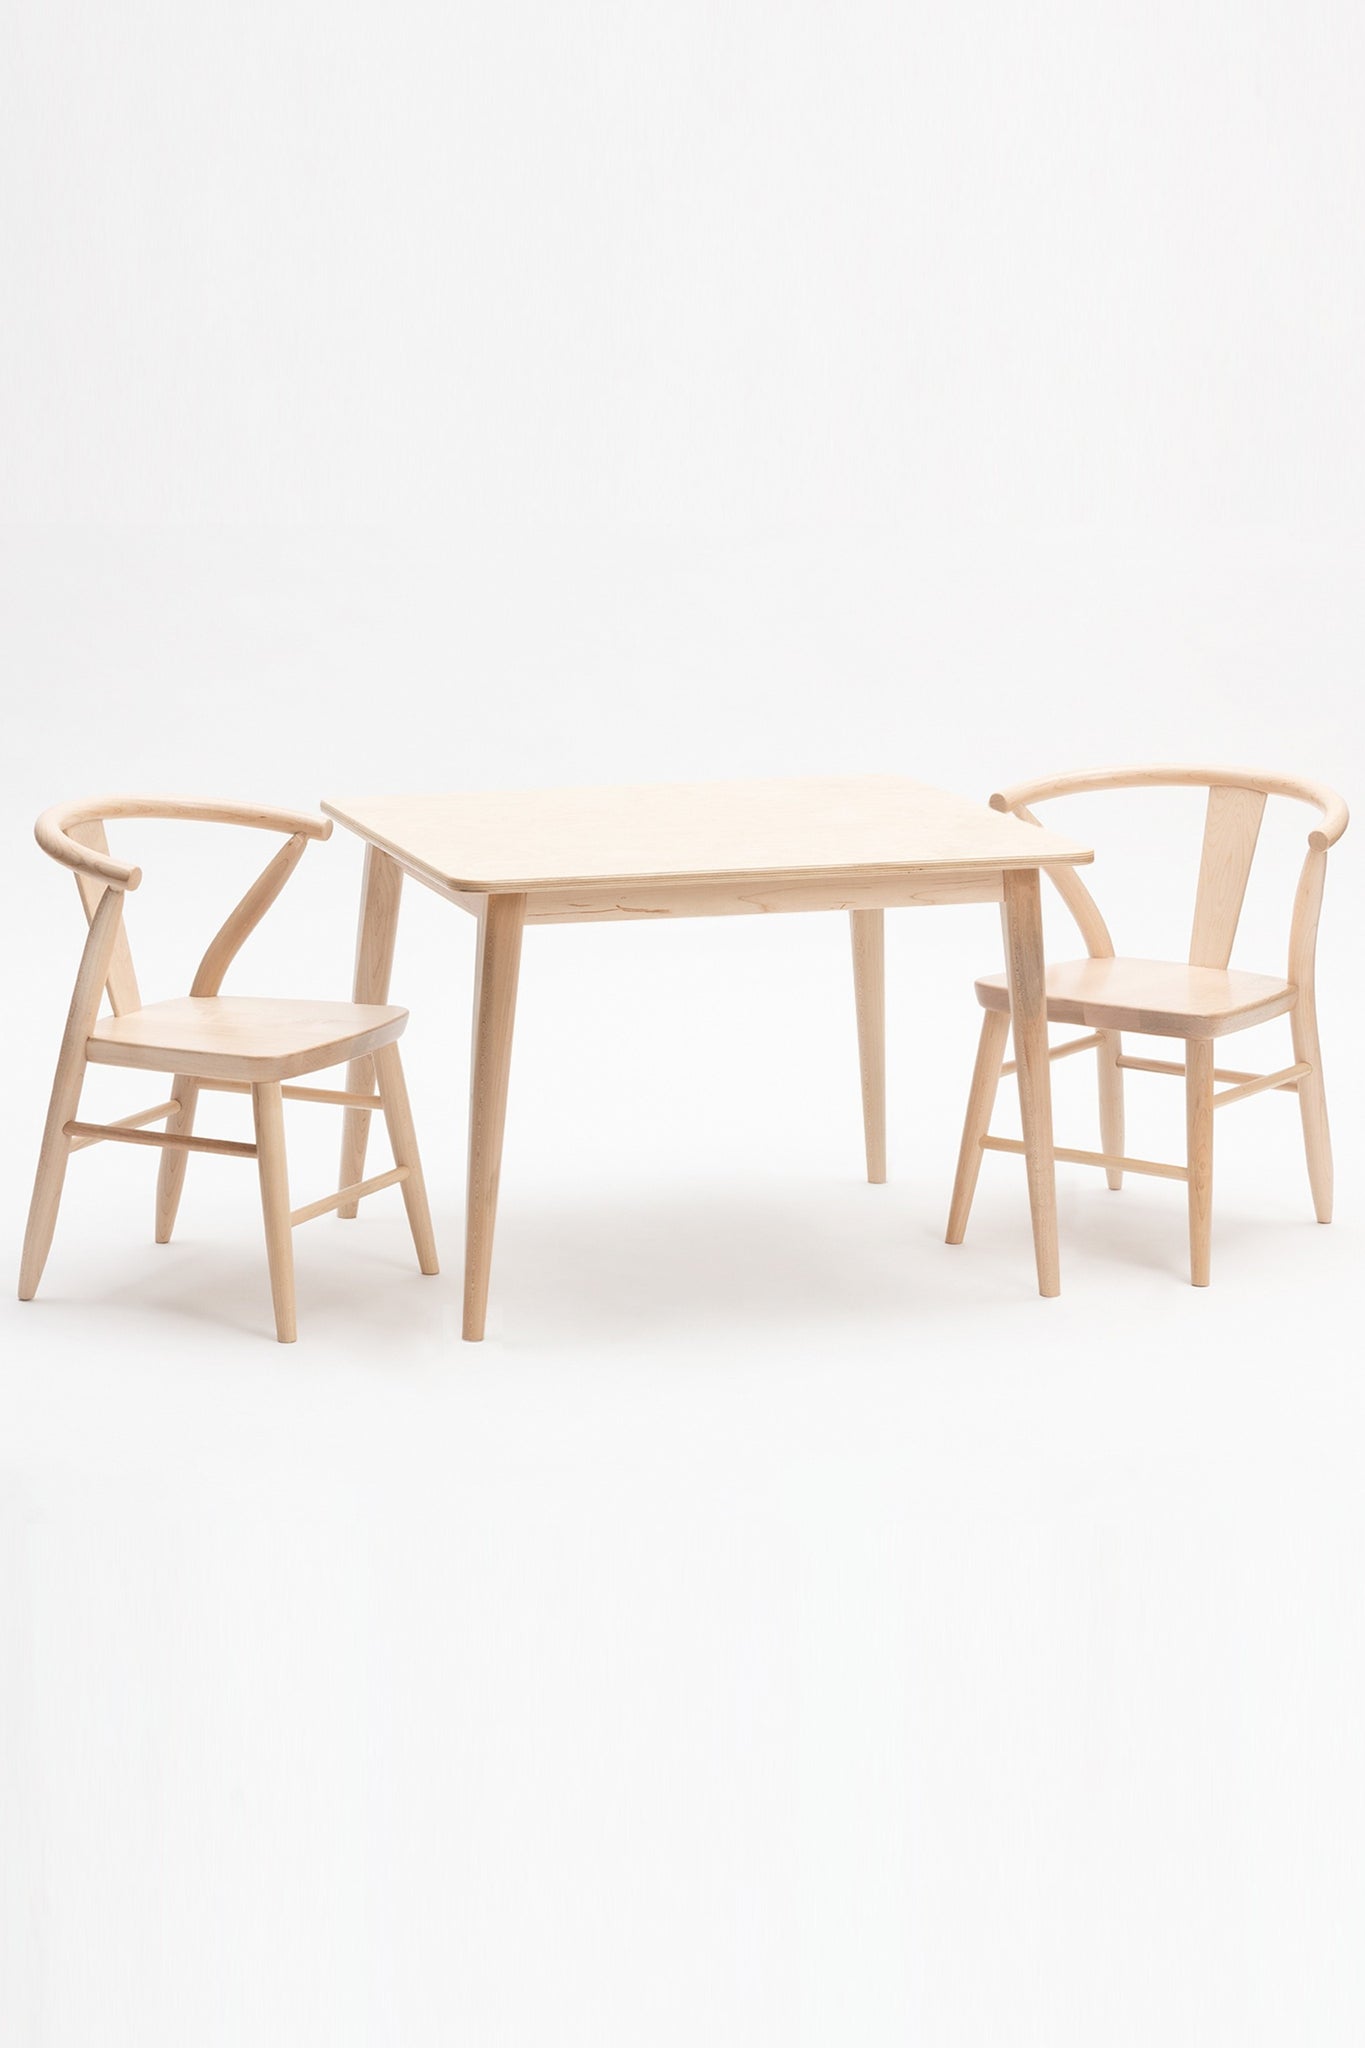 Milton and Goose Crescent Children's table and chairs in natural wood finish.  Made with sustainable materials and non-toxic finishes.